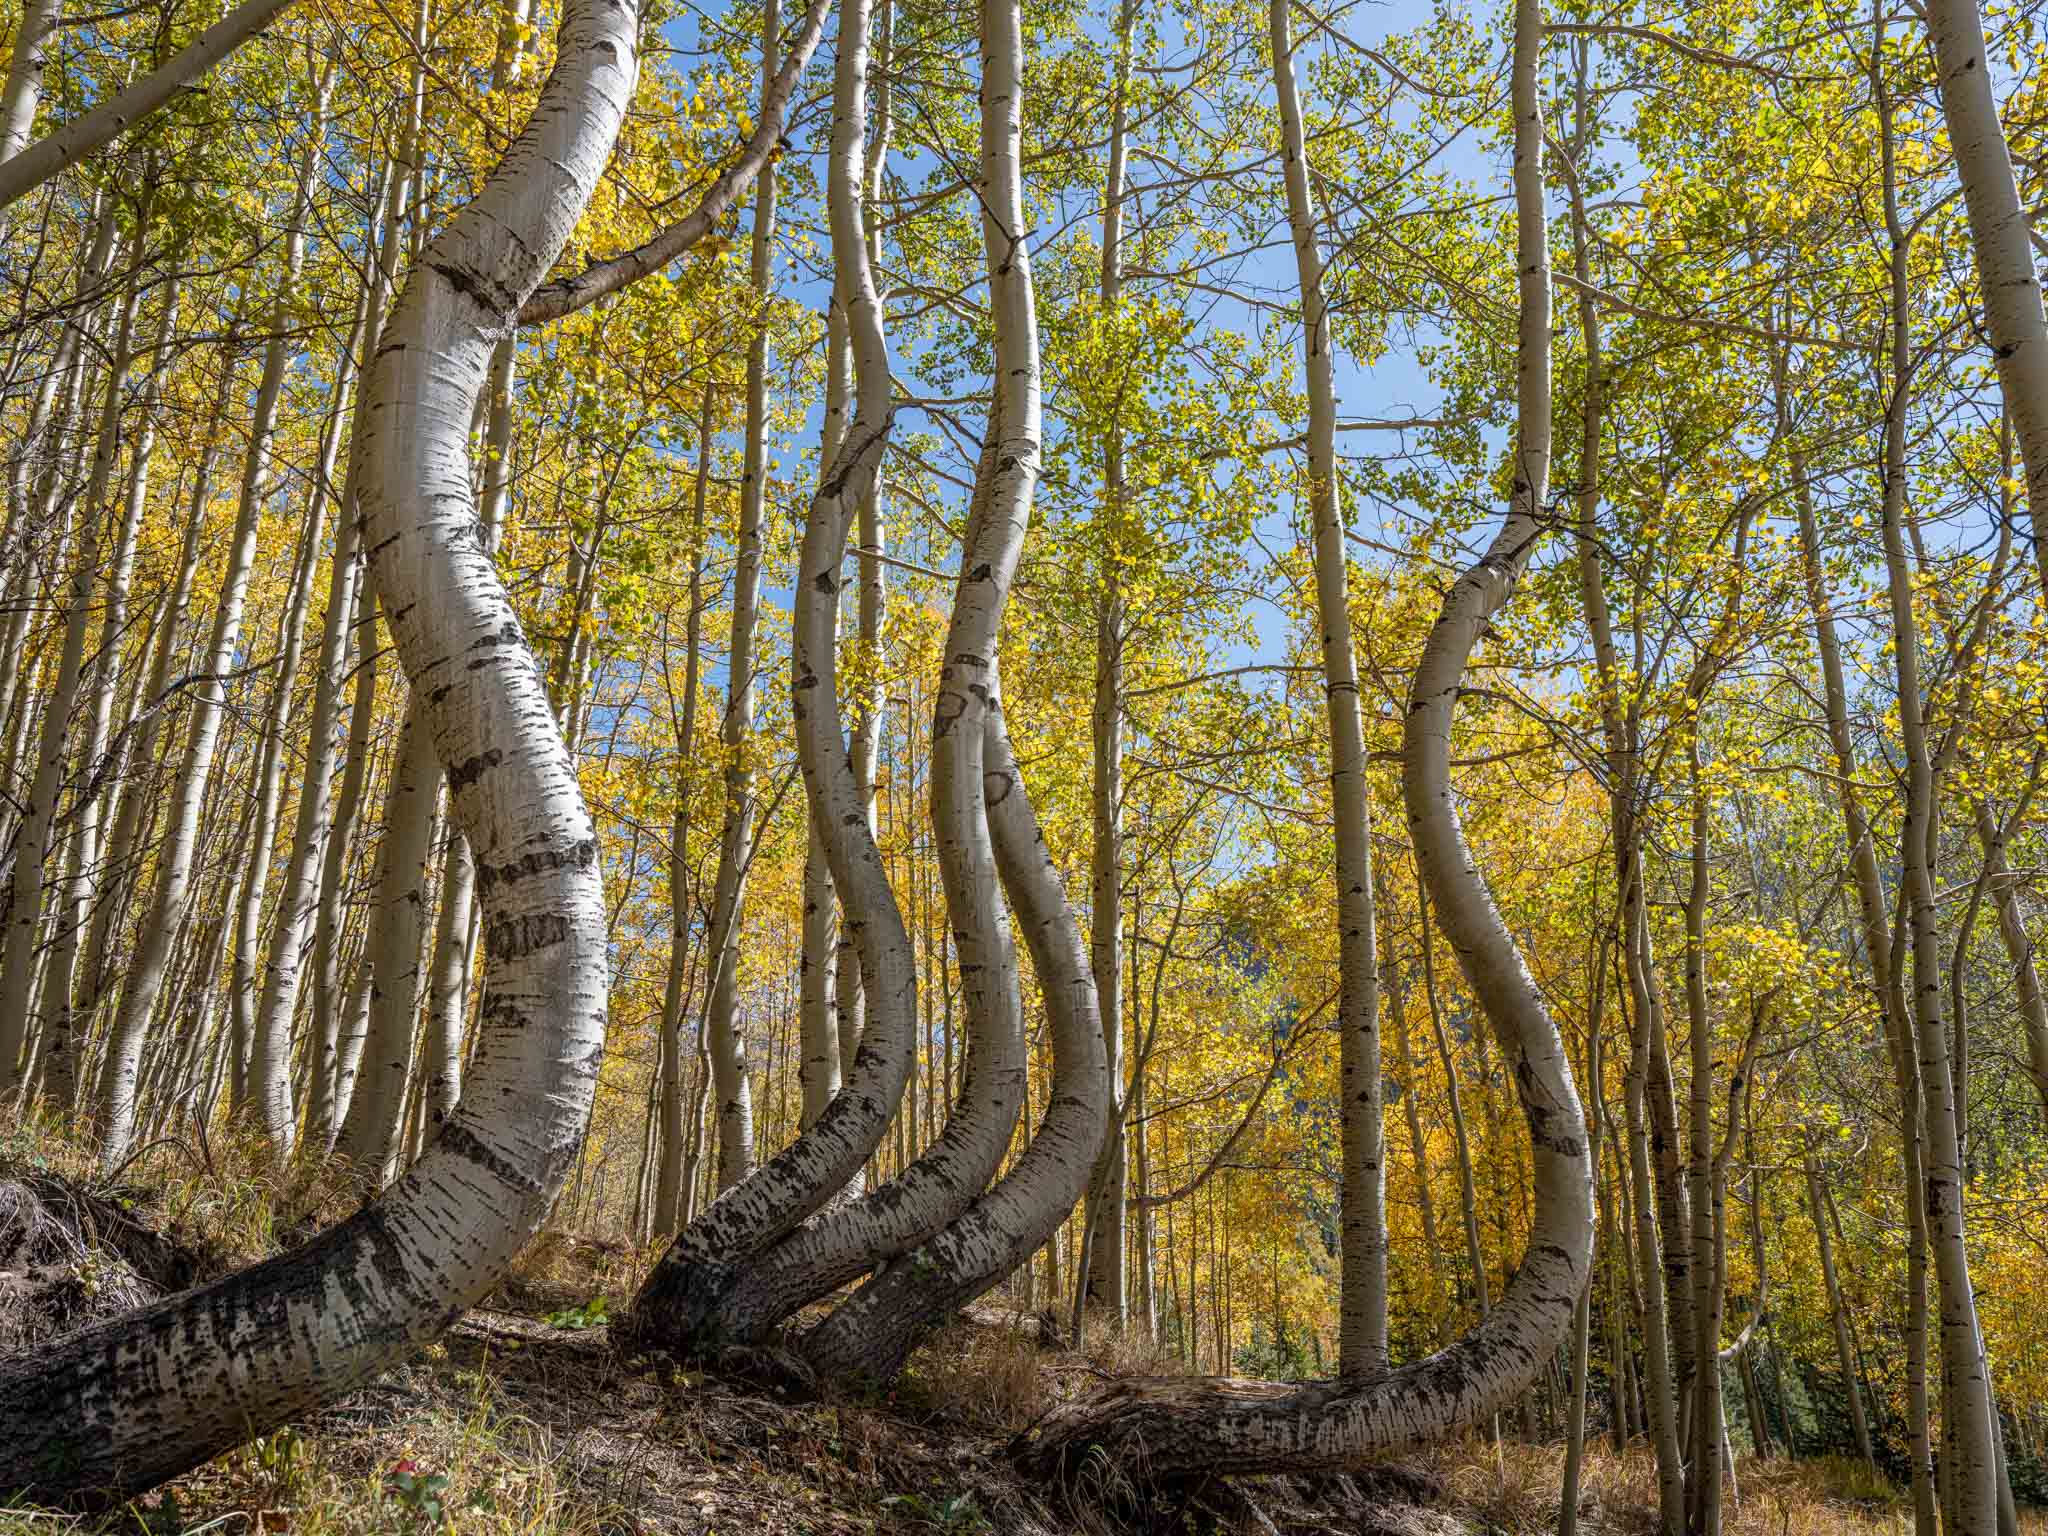 a group of trees with twisted trunks